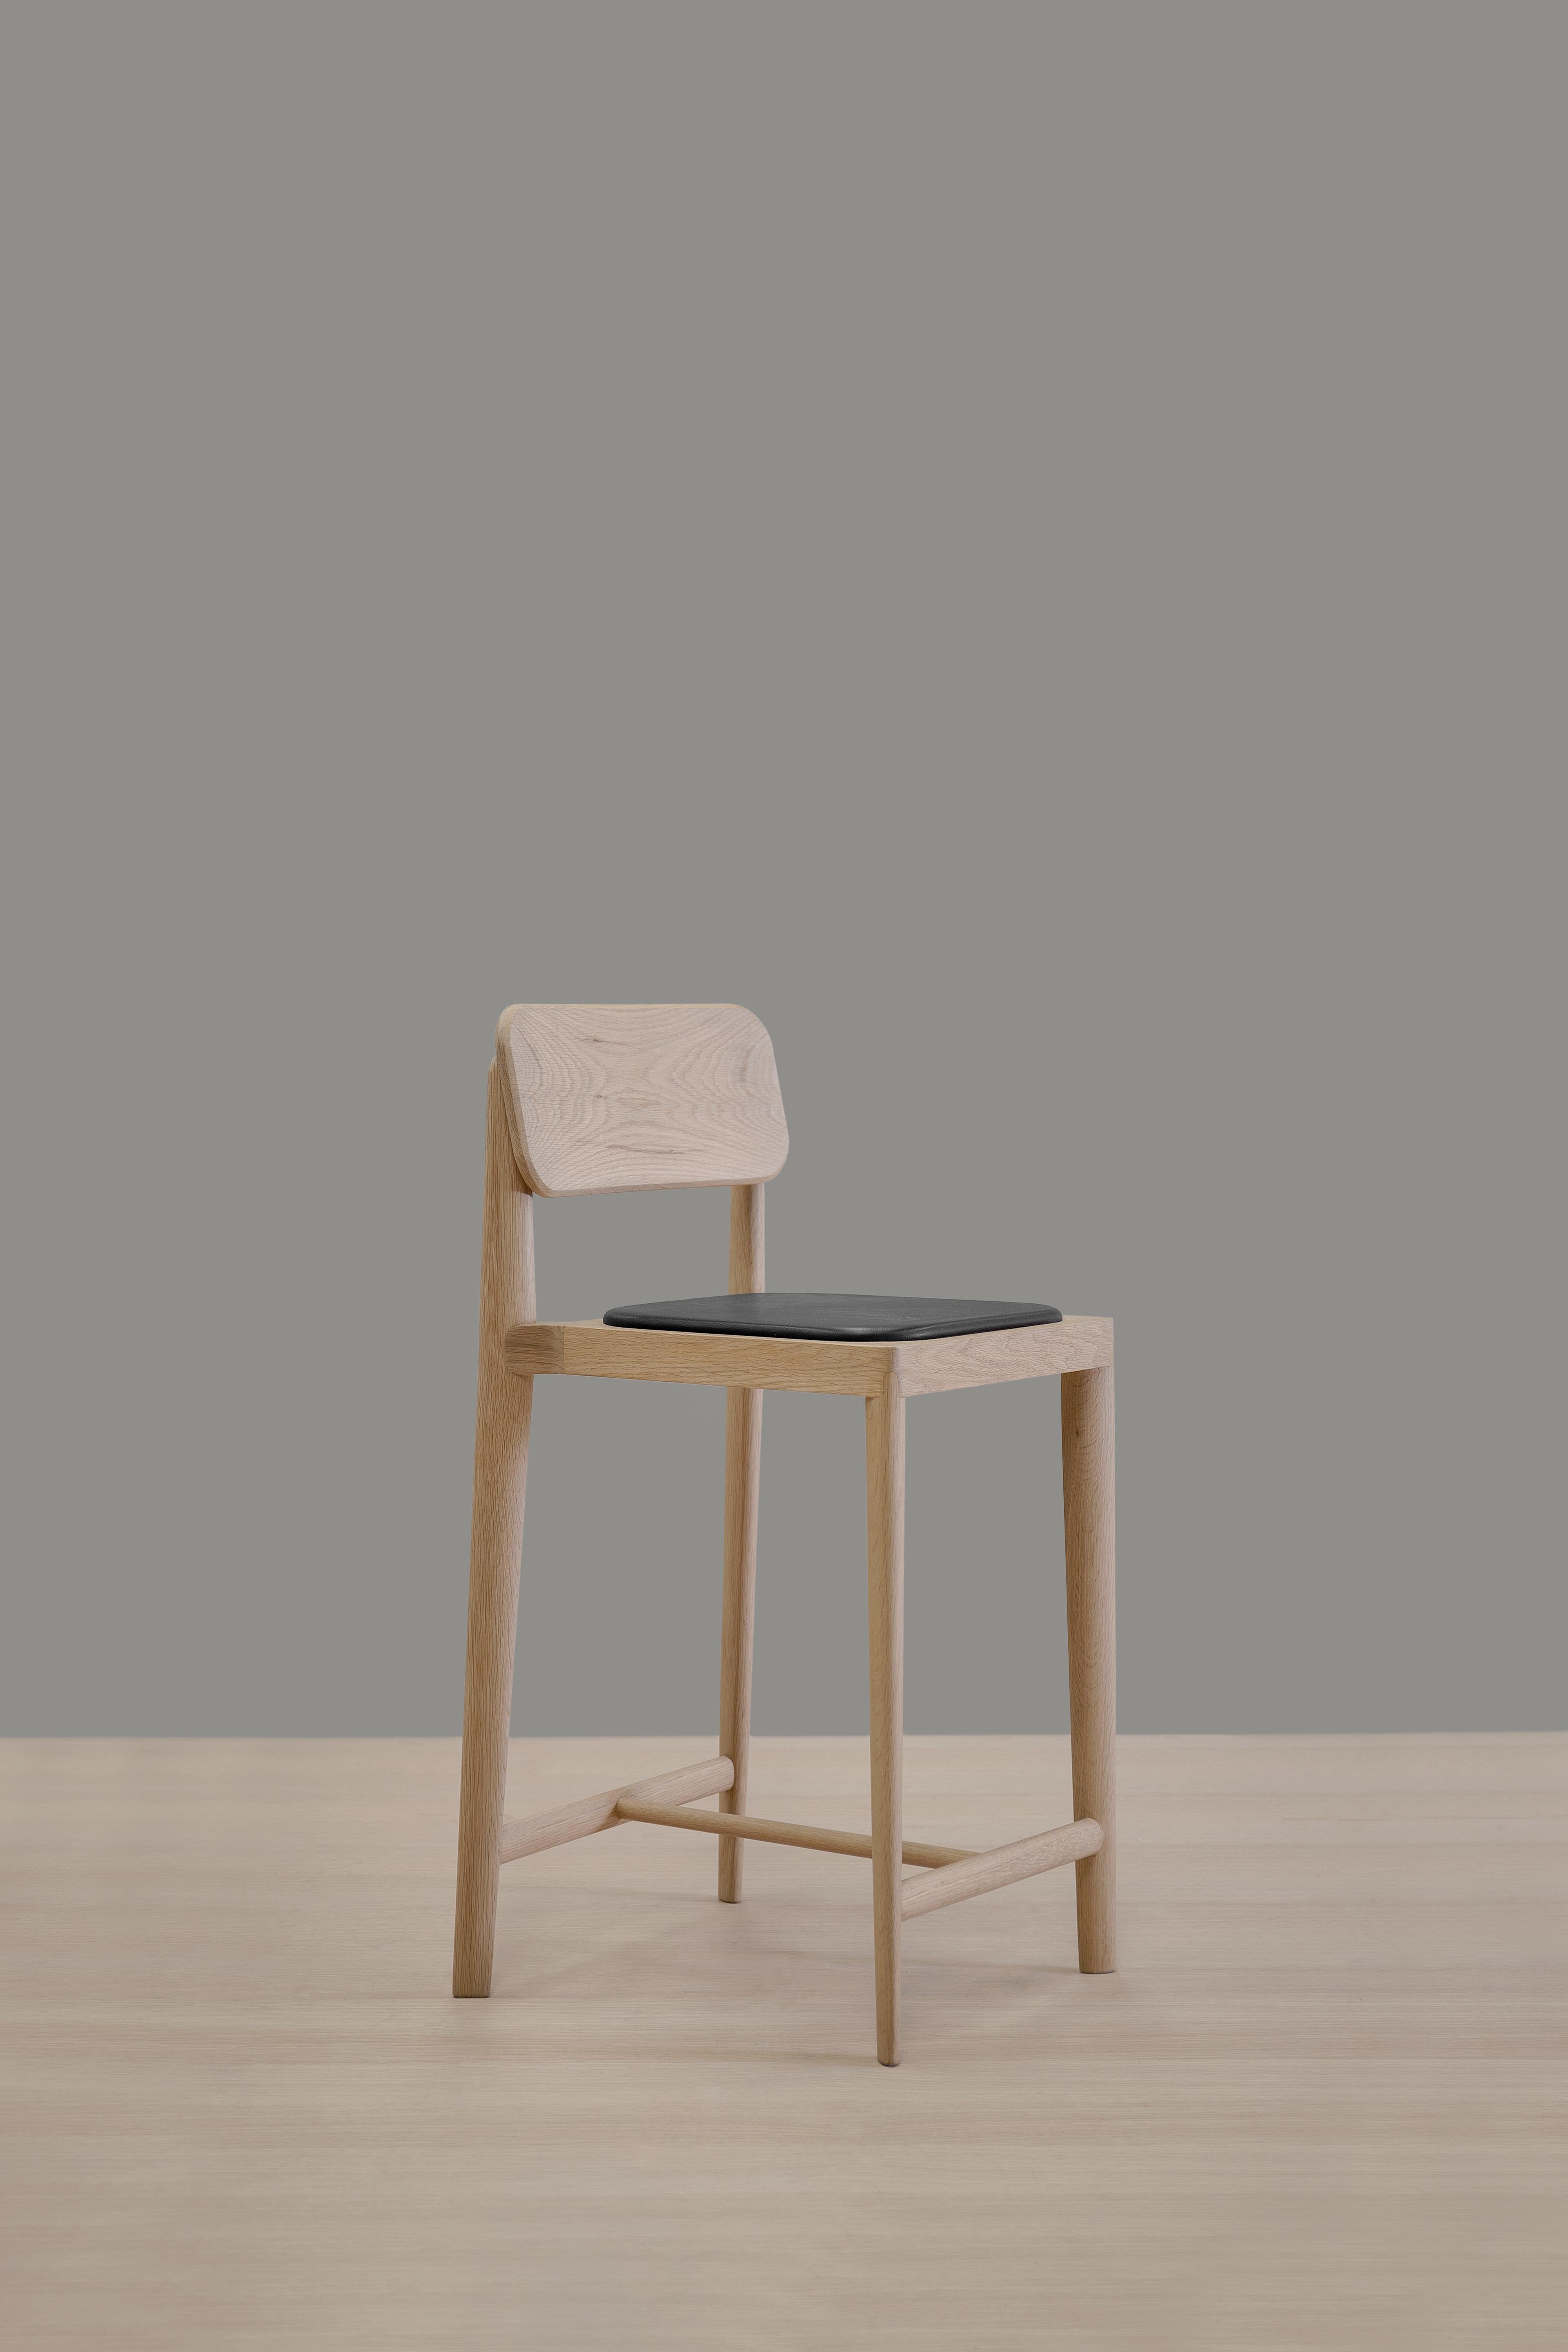 Gerard barstool by Thai Hua.
Dimensions: D 50 x W 48 x H 88 cm
Materials: oak wood, leather.

Solid holm white oak and black leather stool.

Thai Hua is an industrial designer originally from Vietnam trained in Switzerland. Since 2003 Thai Hua